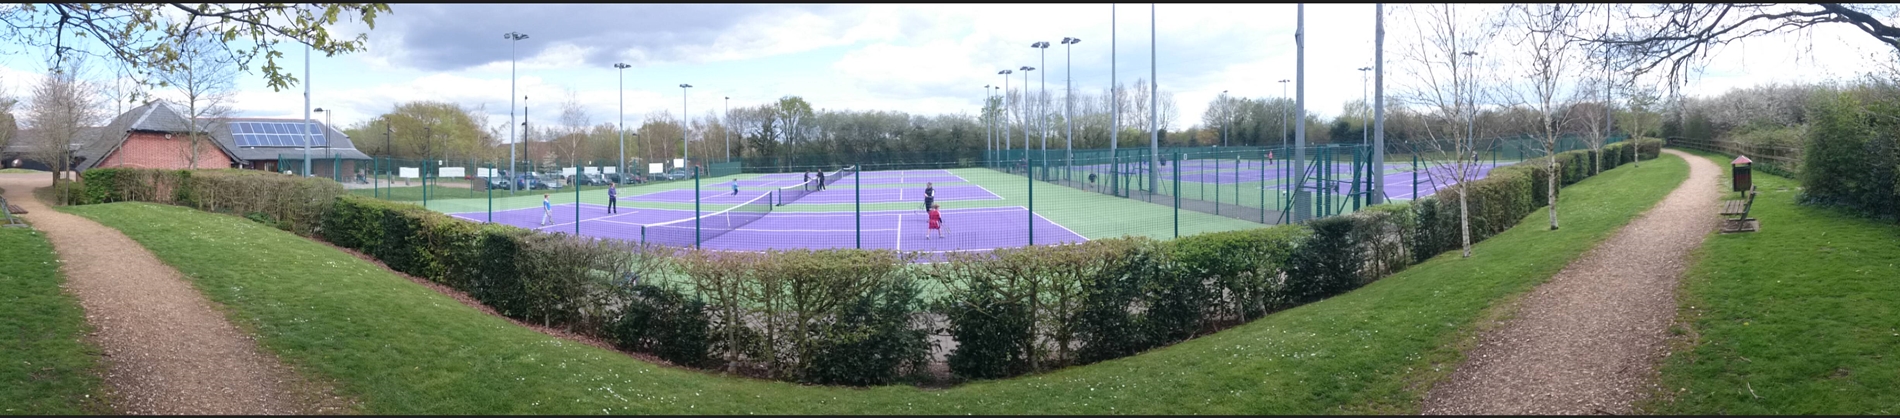 Panorama view of the Totton & Eling Tennis Centre